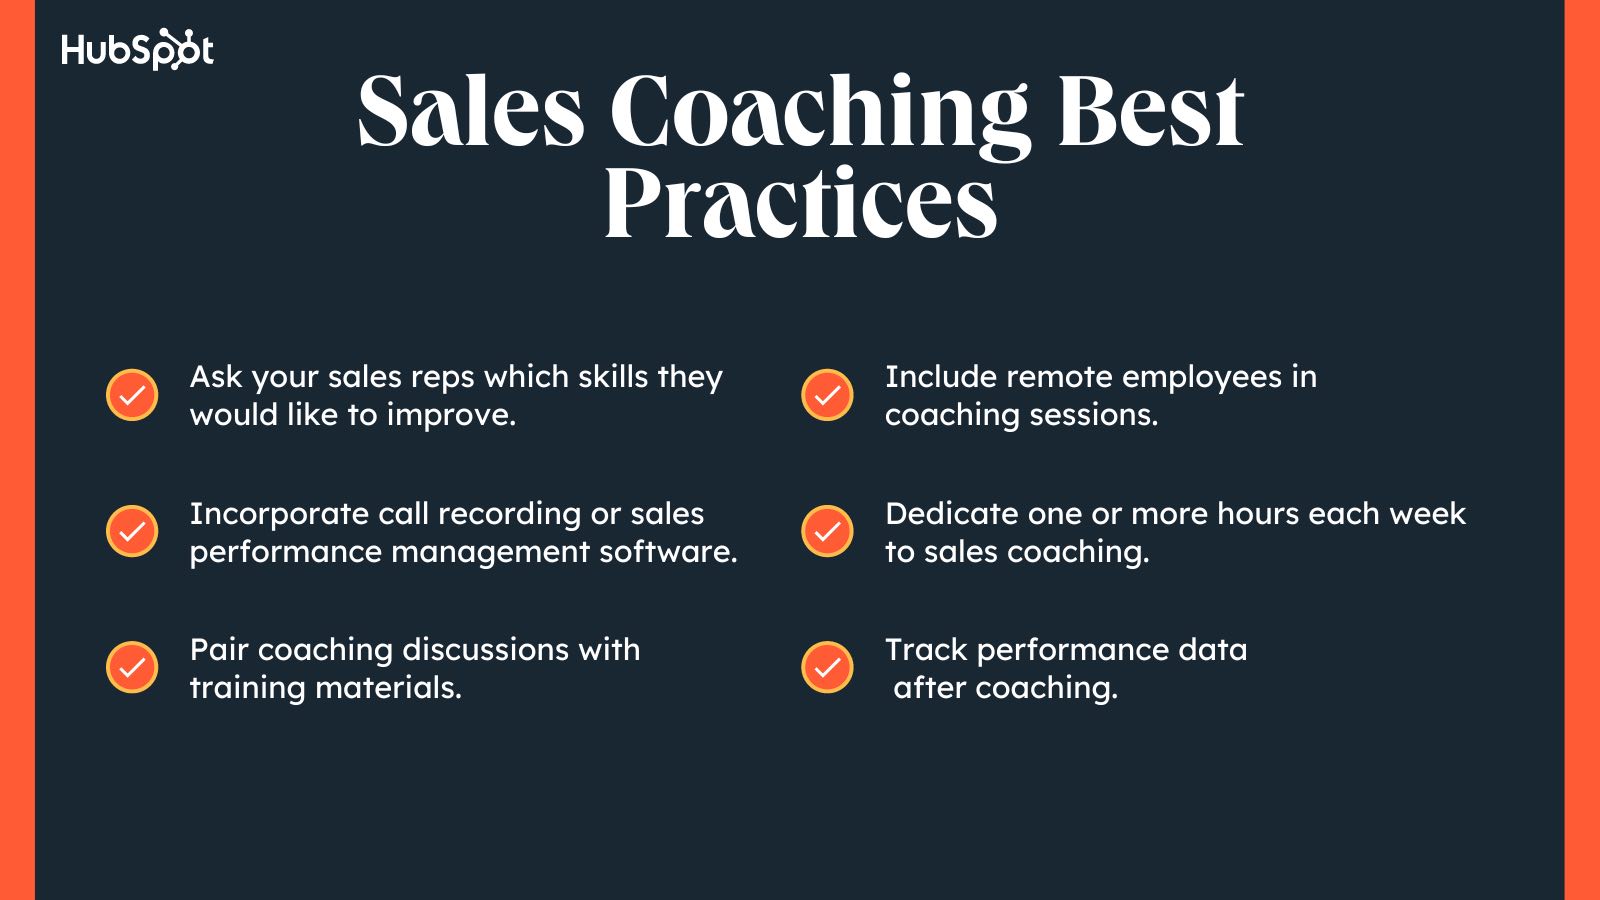 sales coaching best practices, get sales reps involved, pair coaching discussions with training materials, track performance data, dedicate one or more hours to coaching, include remote employees, use a performance management software